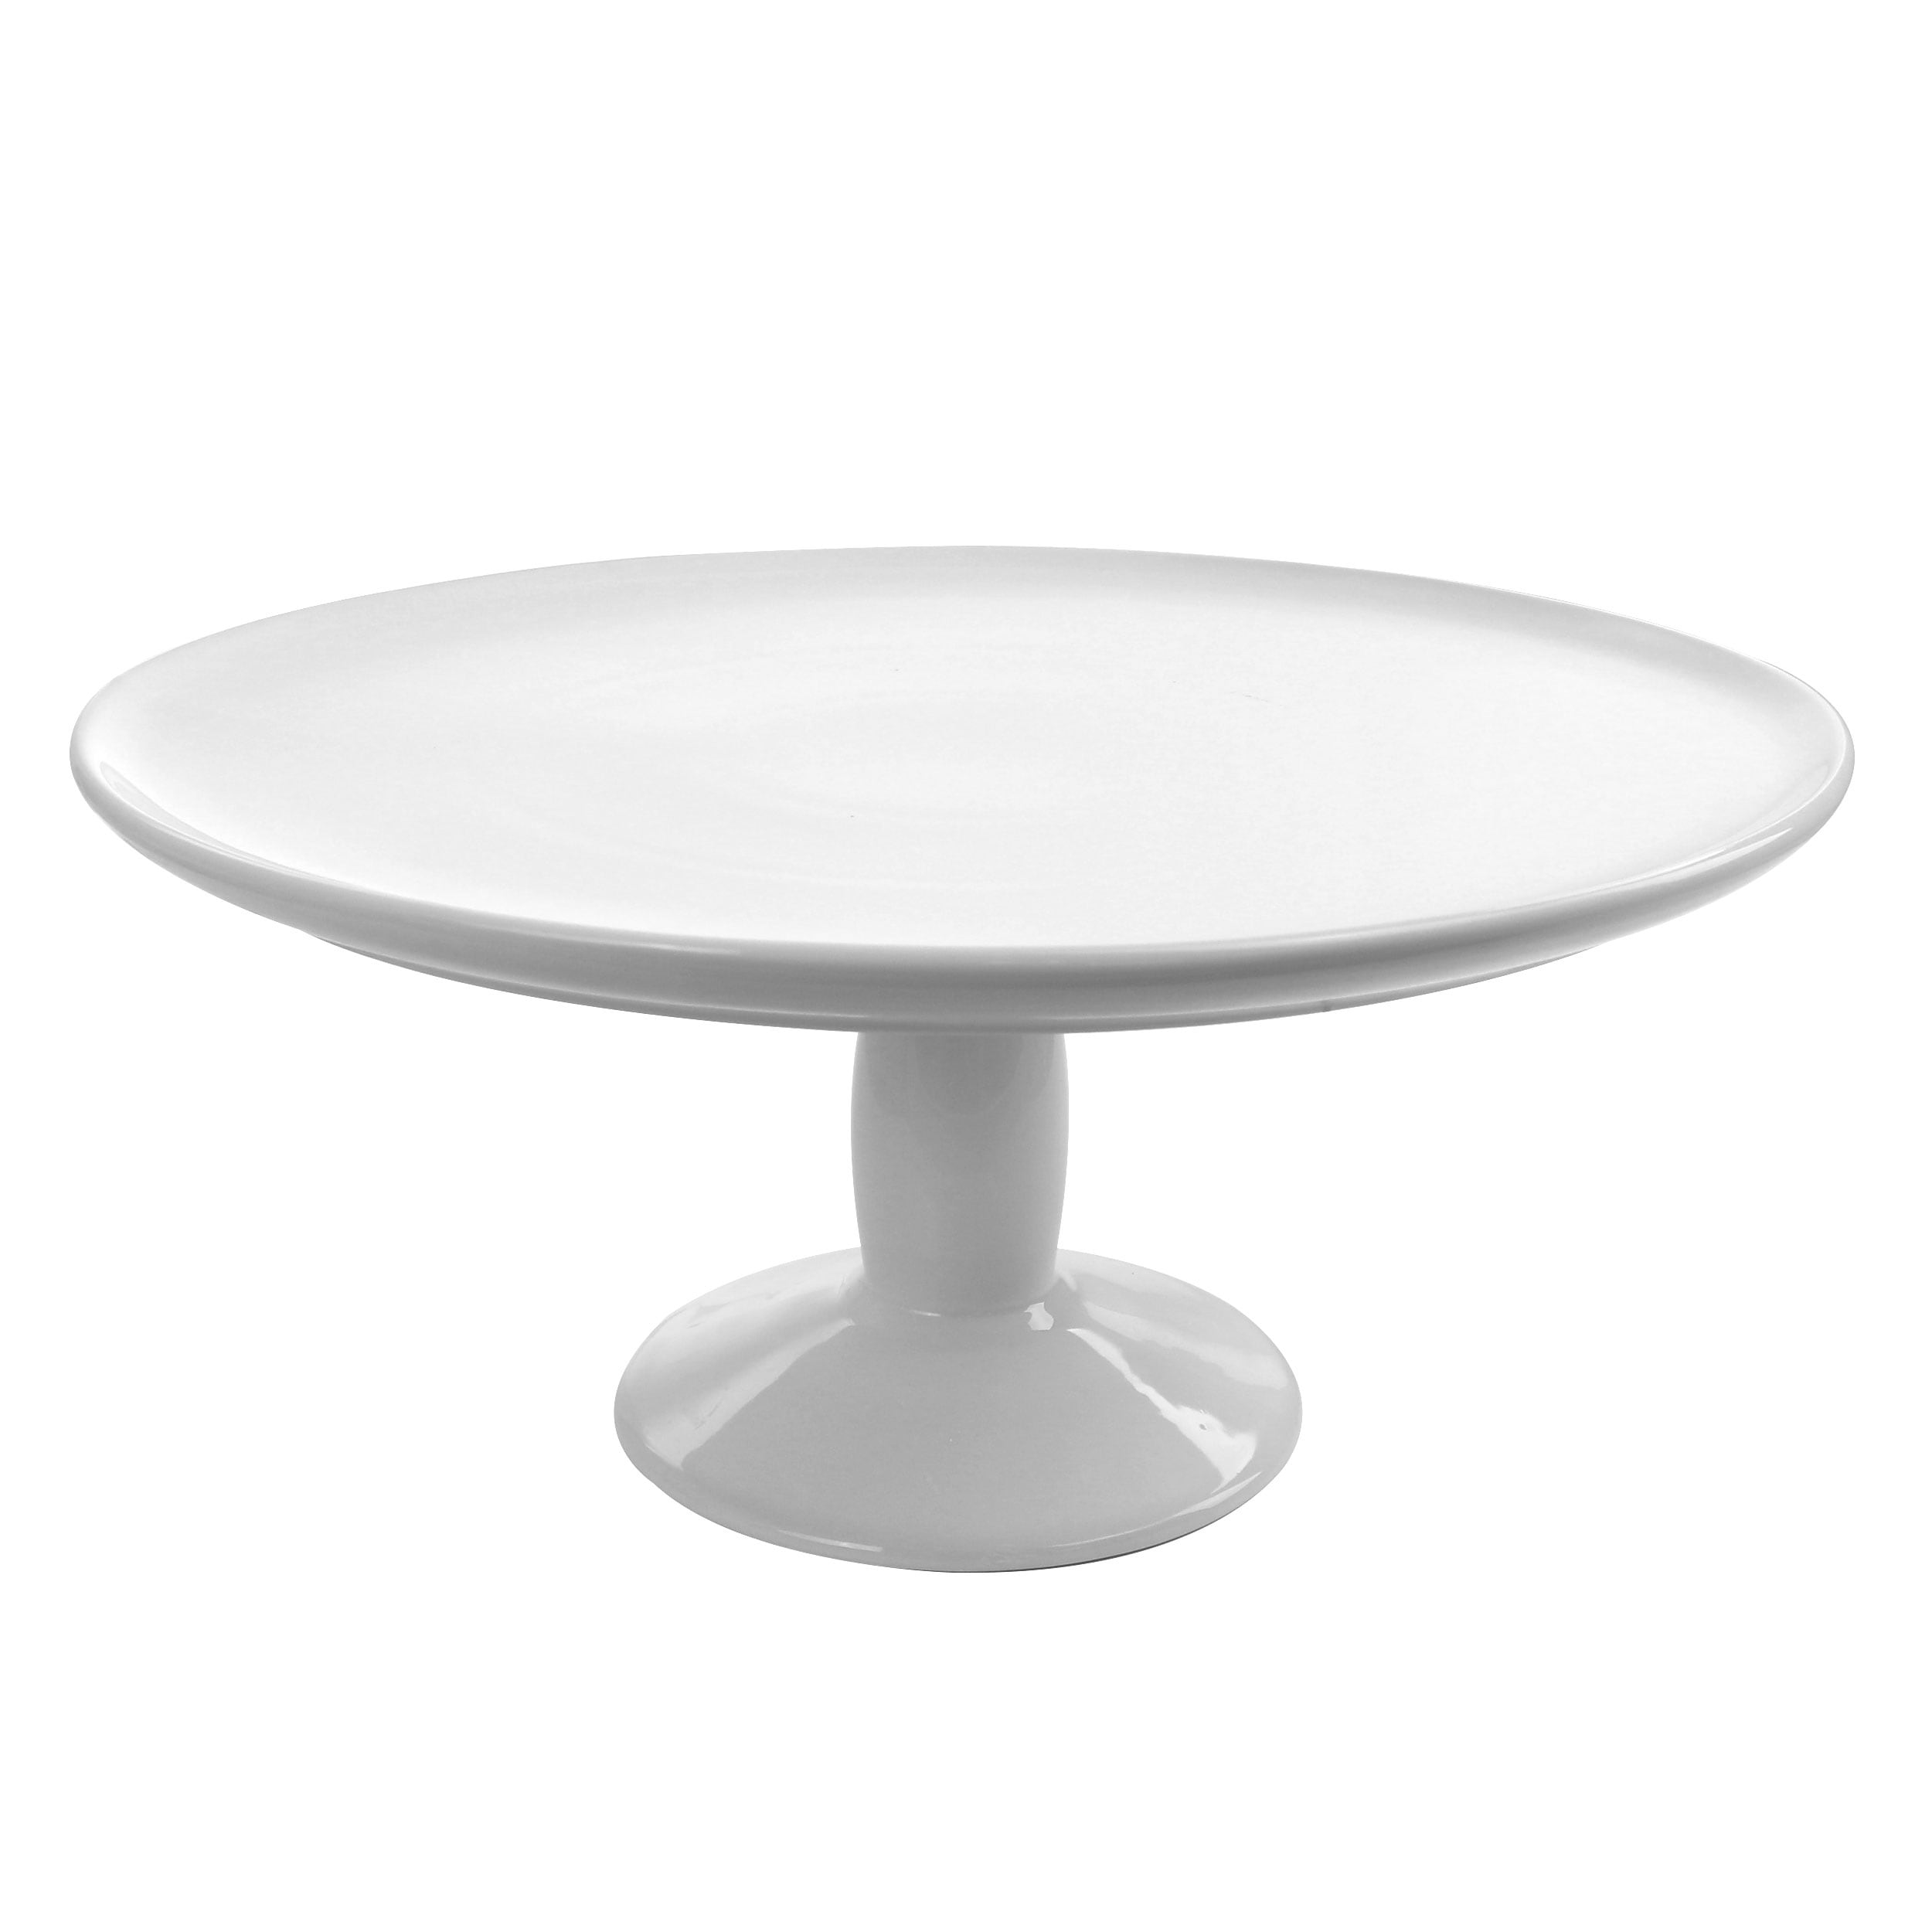 Plastic Cake Stands - Clear Round Cake Stand | Smarty Had A Party